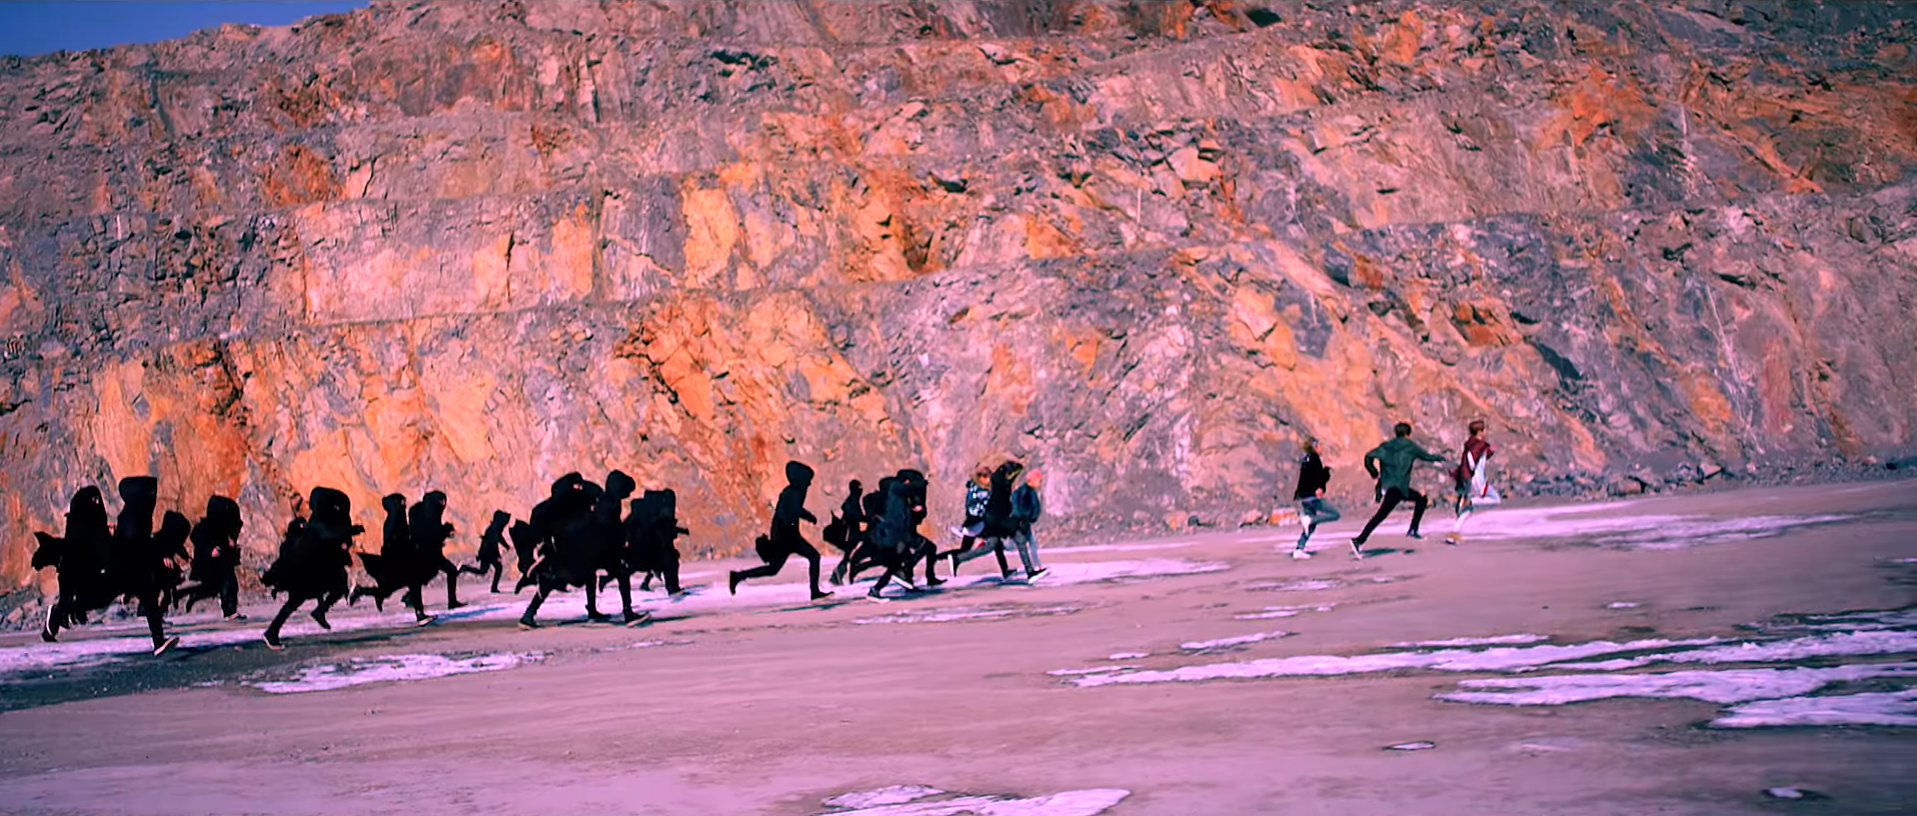 BTS Challenges Their Haters in “Not Today” – Seoulbeats